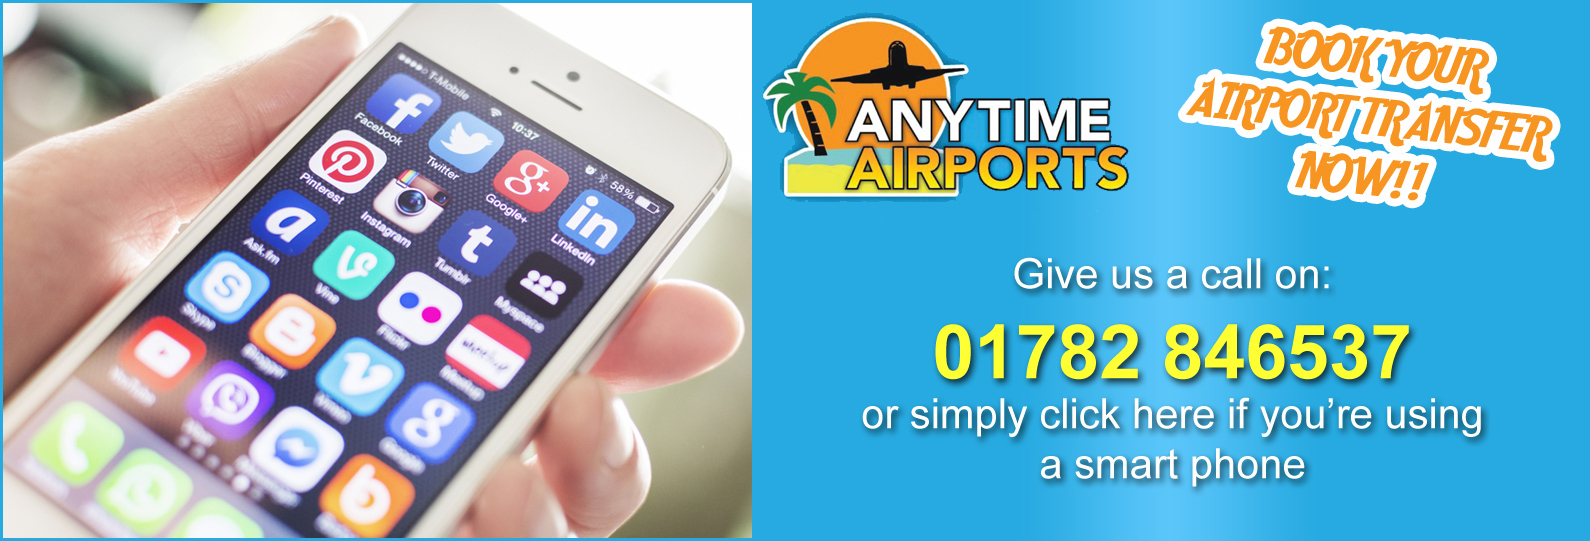 call anytime airports